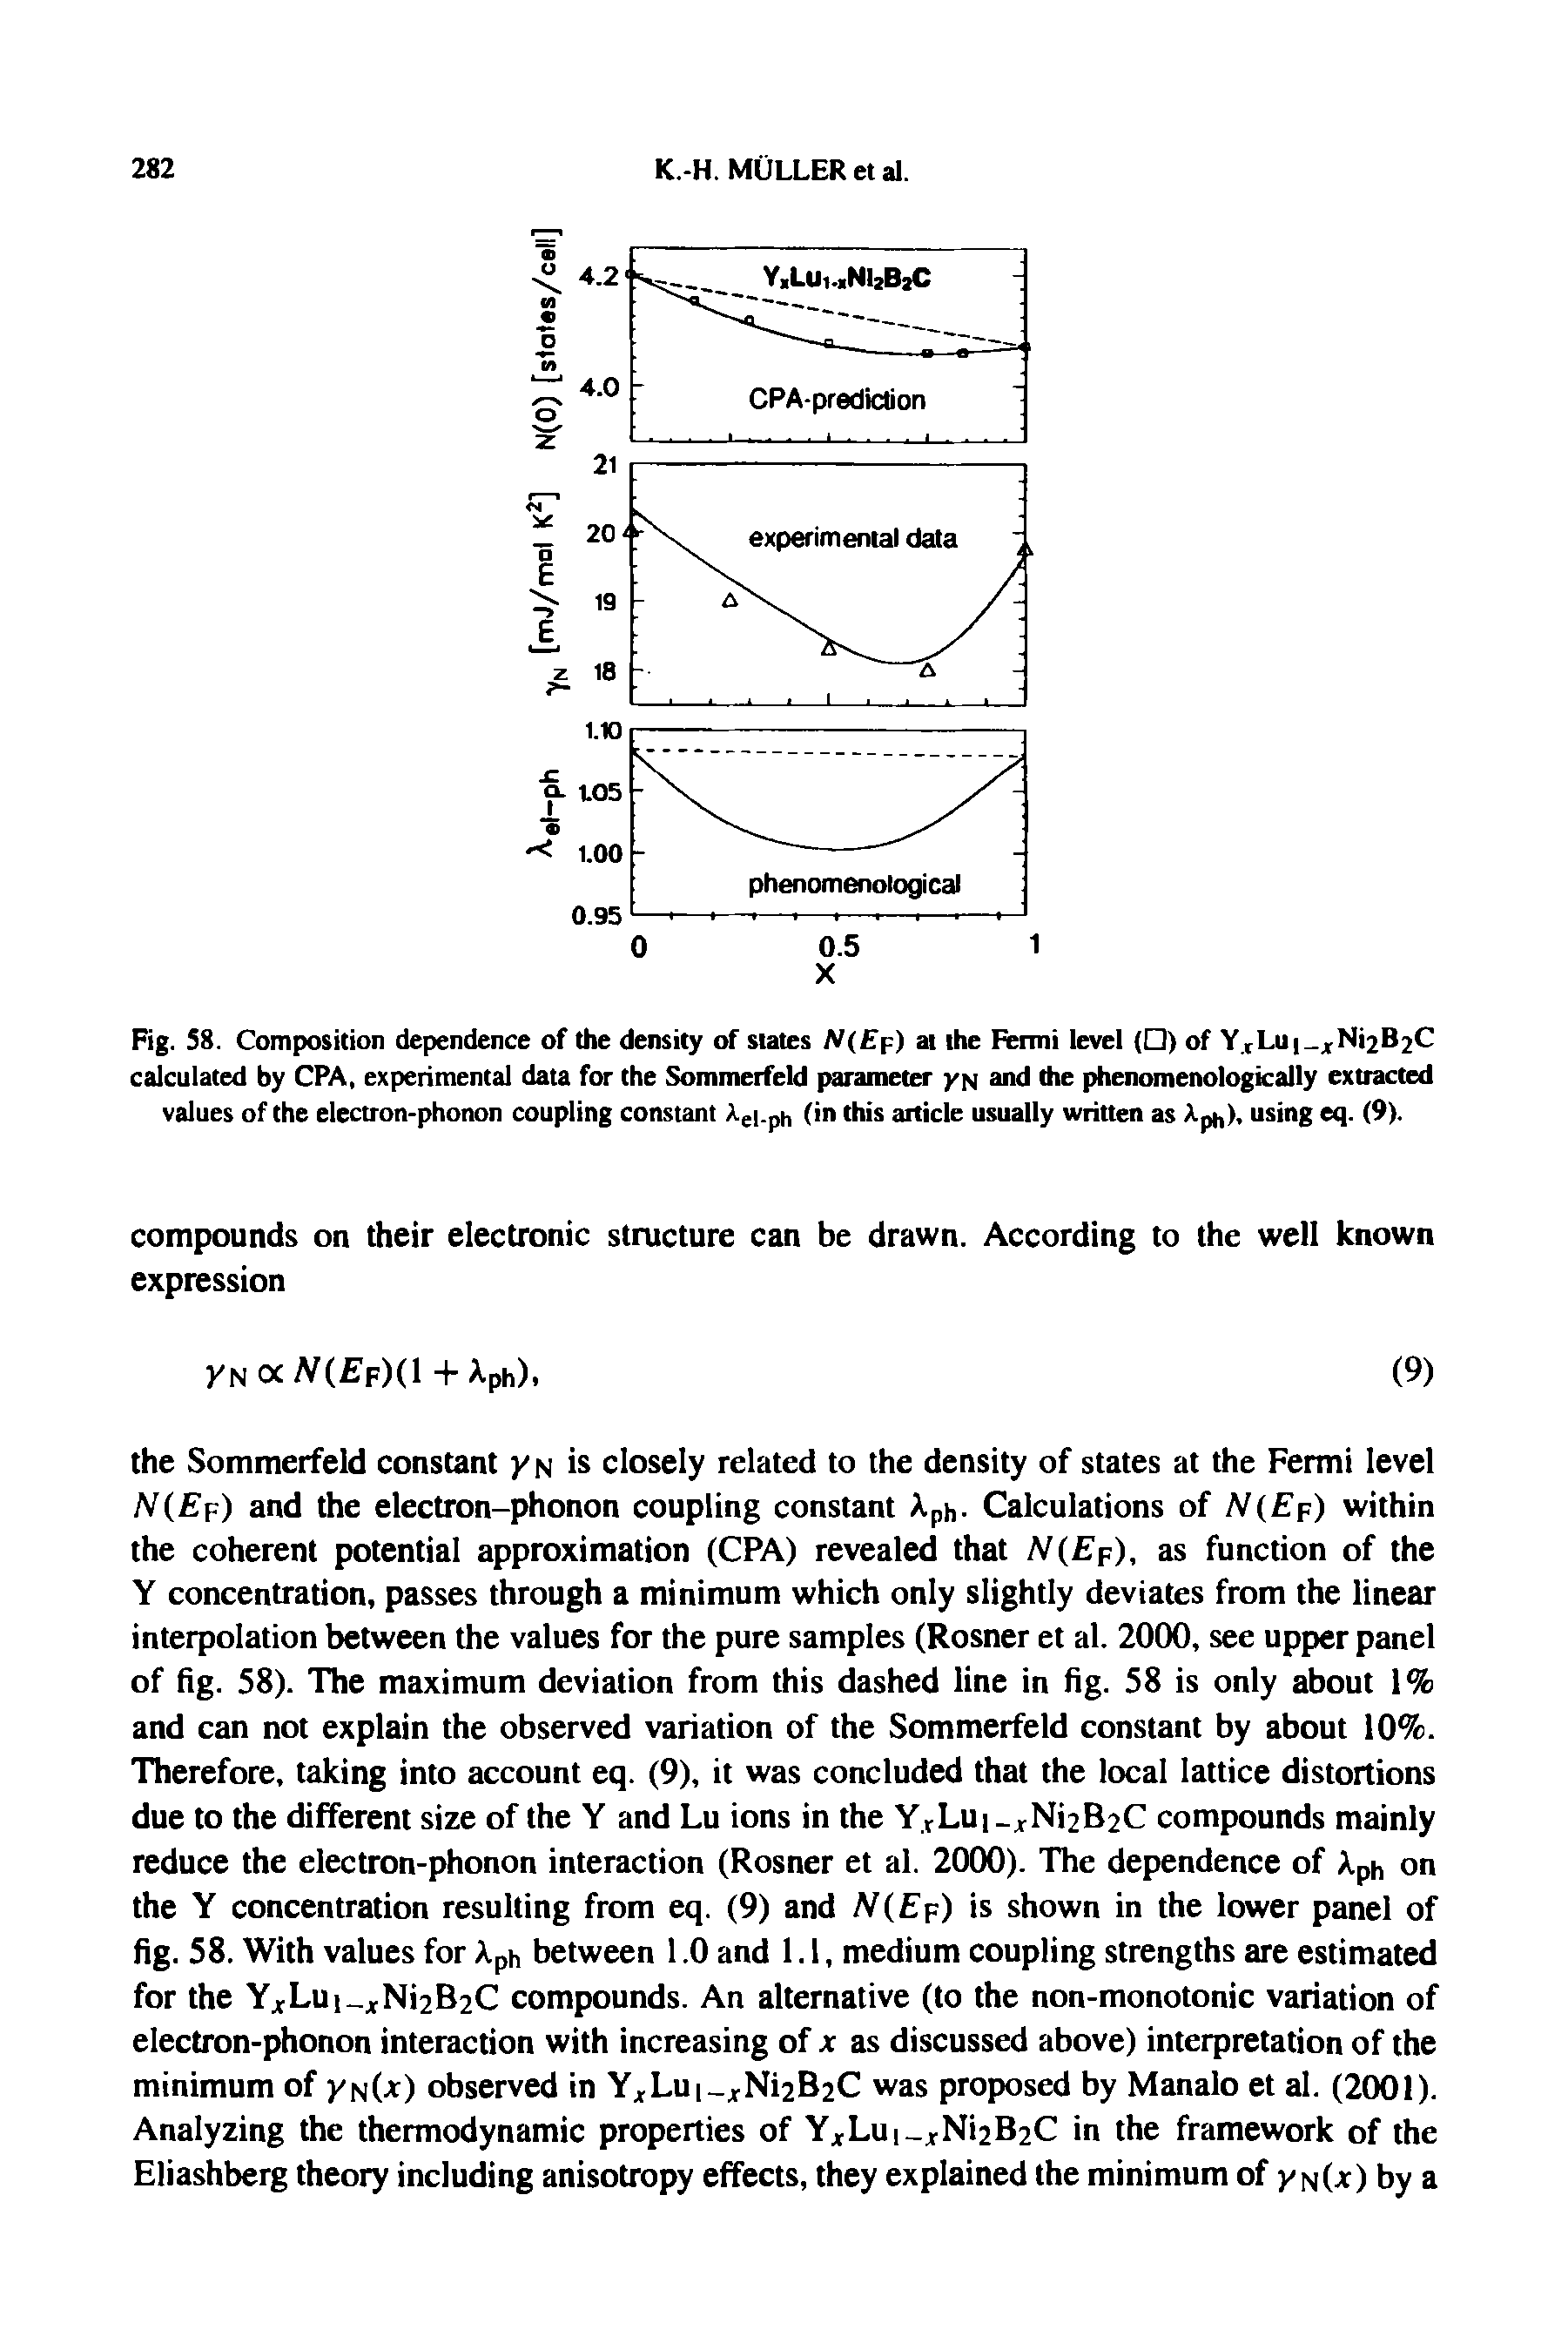 Fig. 58. Composition dependence of the density of states N(E ) at the Fermi level ( ) of Y Lui-xl I C calculated by CPA, experimental data for the Sommerfeld parameter /n end the phenomenologically extracted values of the electron-phonon coupling constant Ae. ph (in this article usually written as Apt,), using eq. (9).